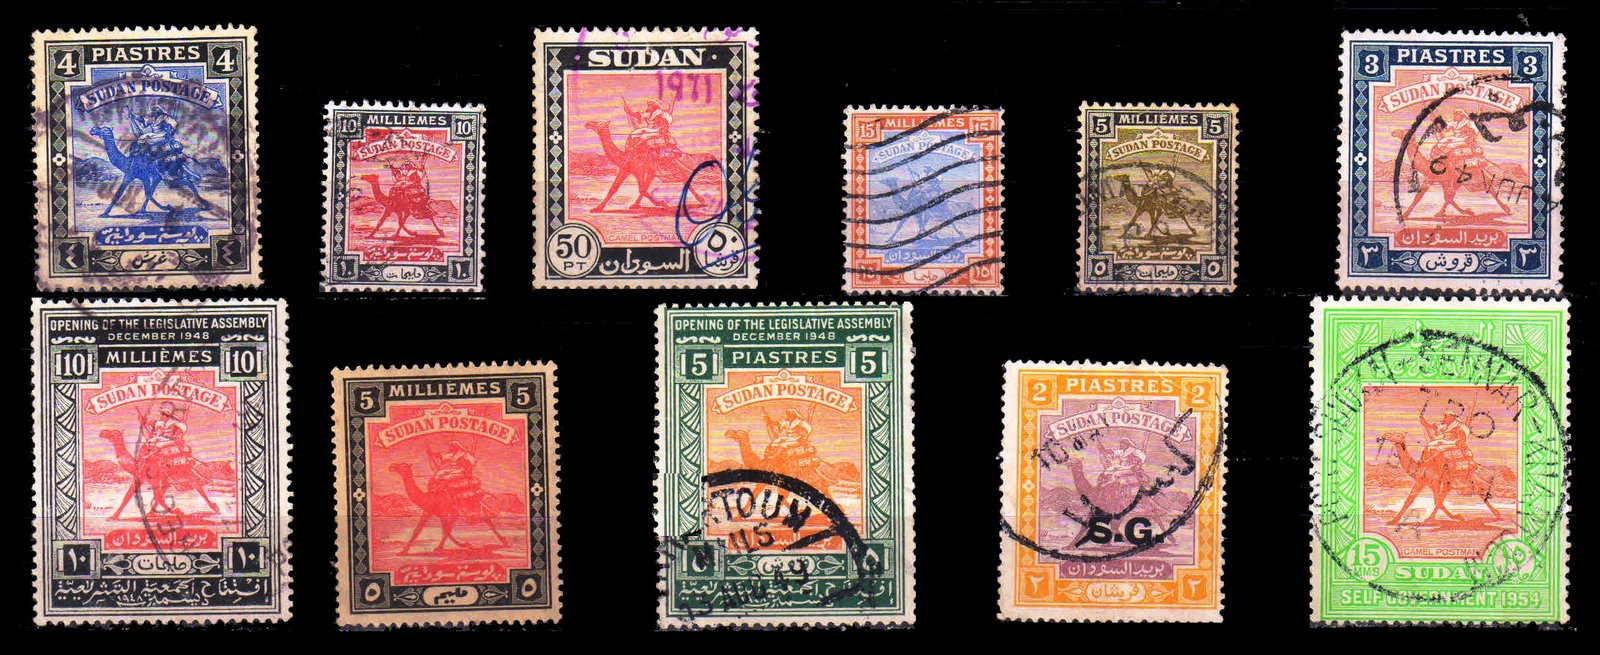 SUDAN - Camel Series. 11 Different Old & Used Stamps